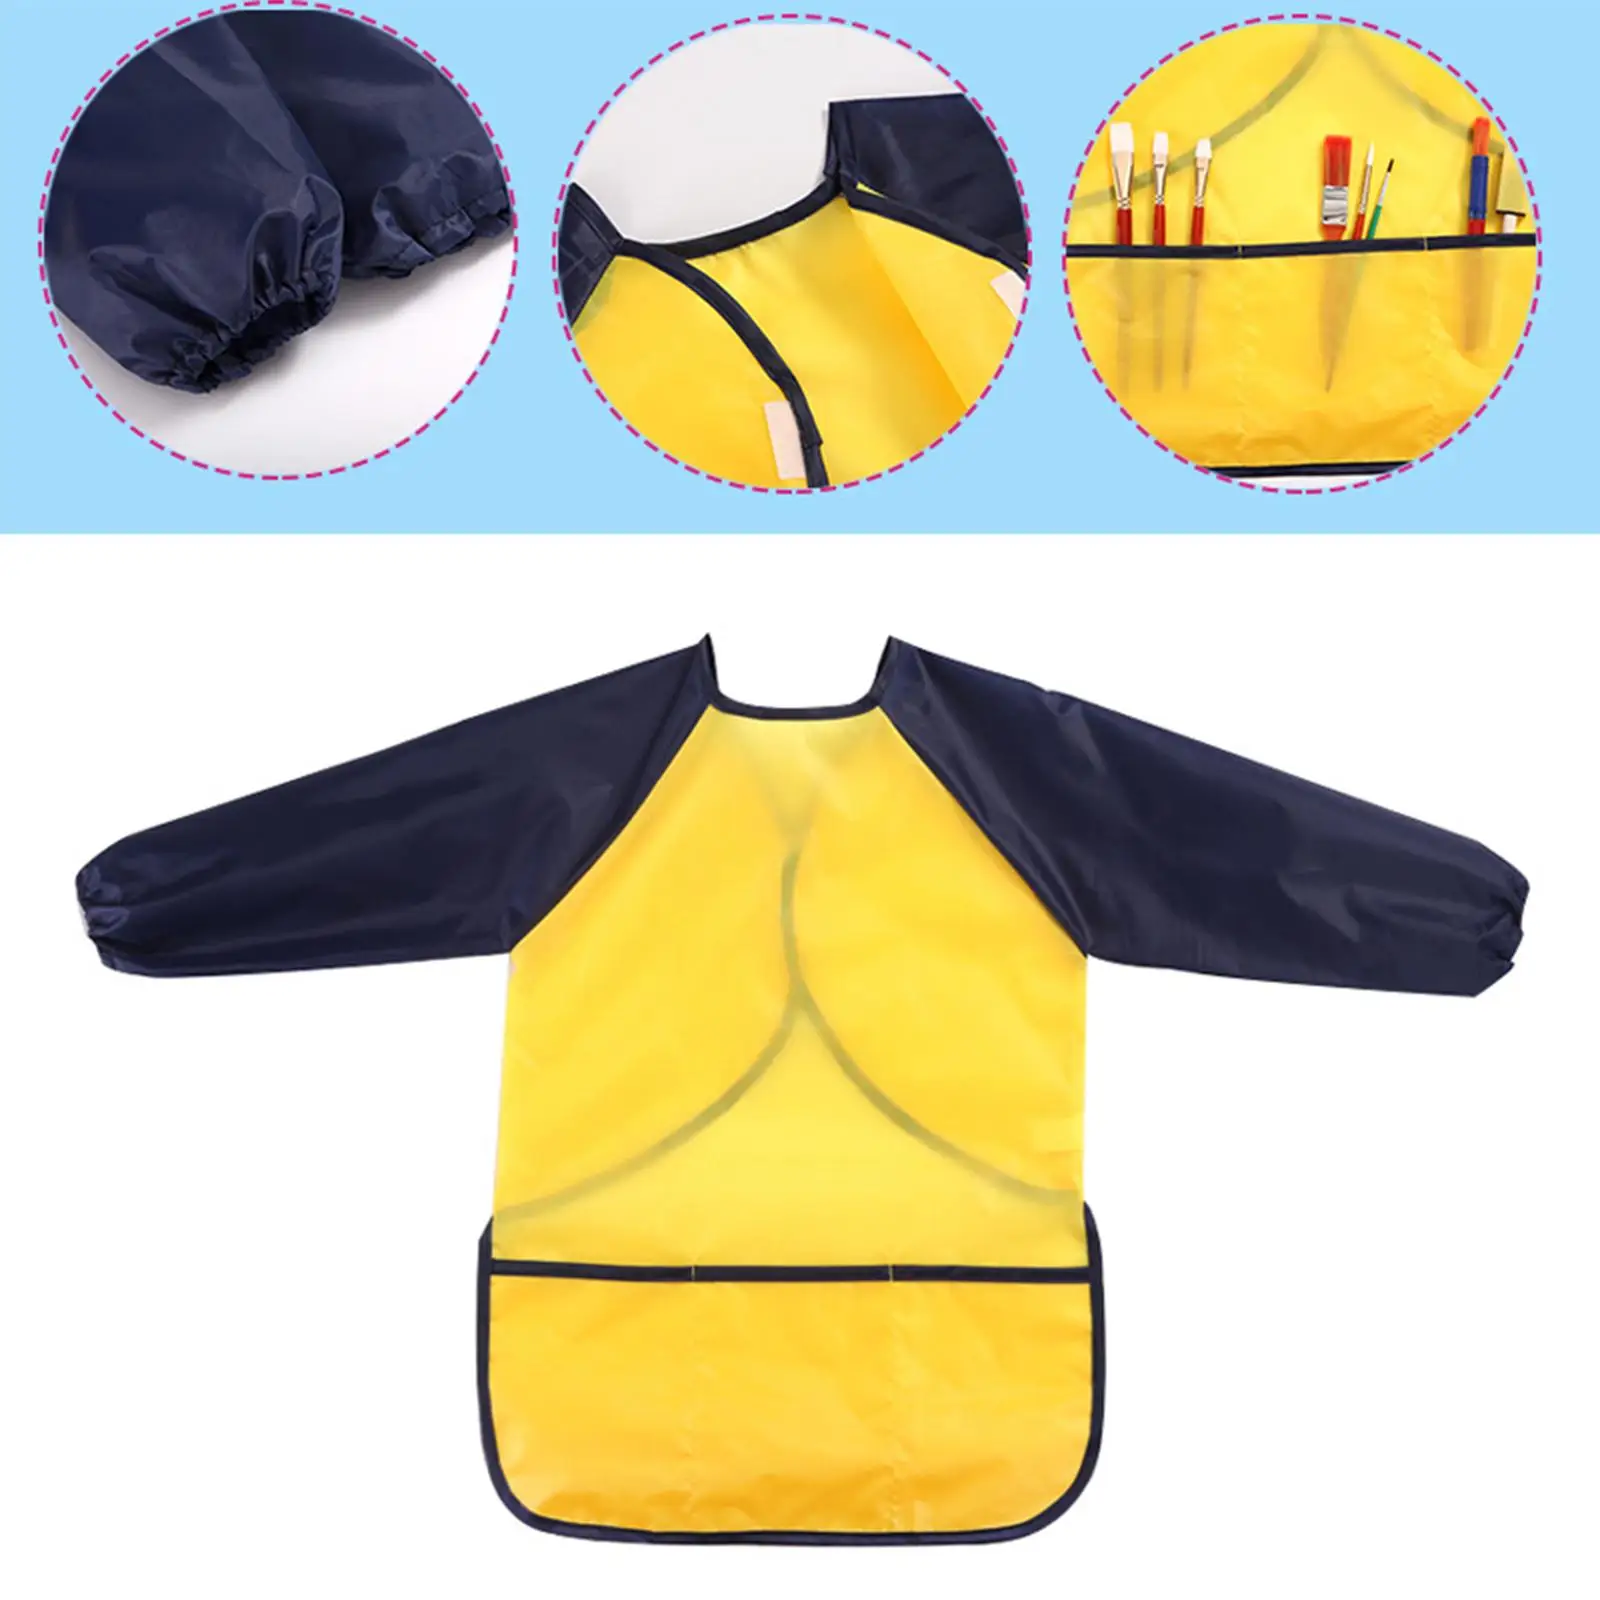 Waterproof Kid Smock, Children`s Painting Aprons with Long Sleeve and 3 Pockets for Painting, Feeding